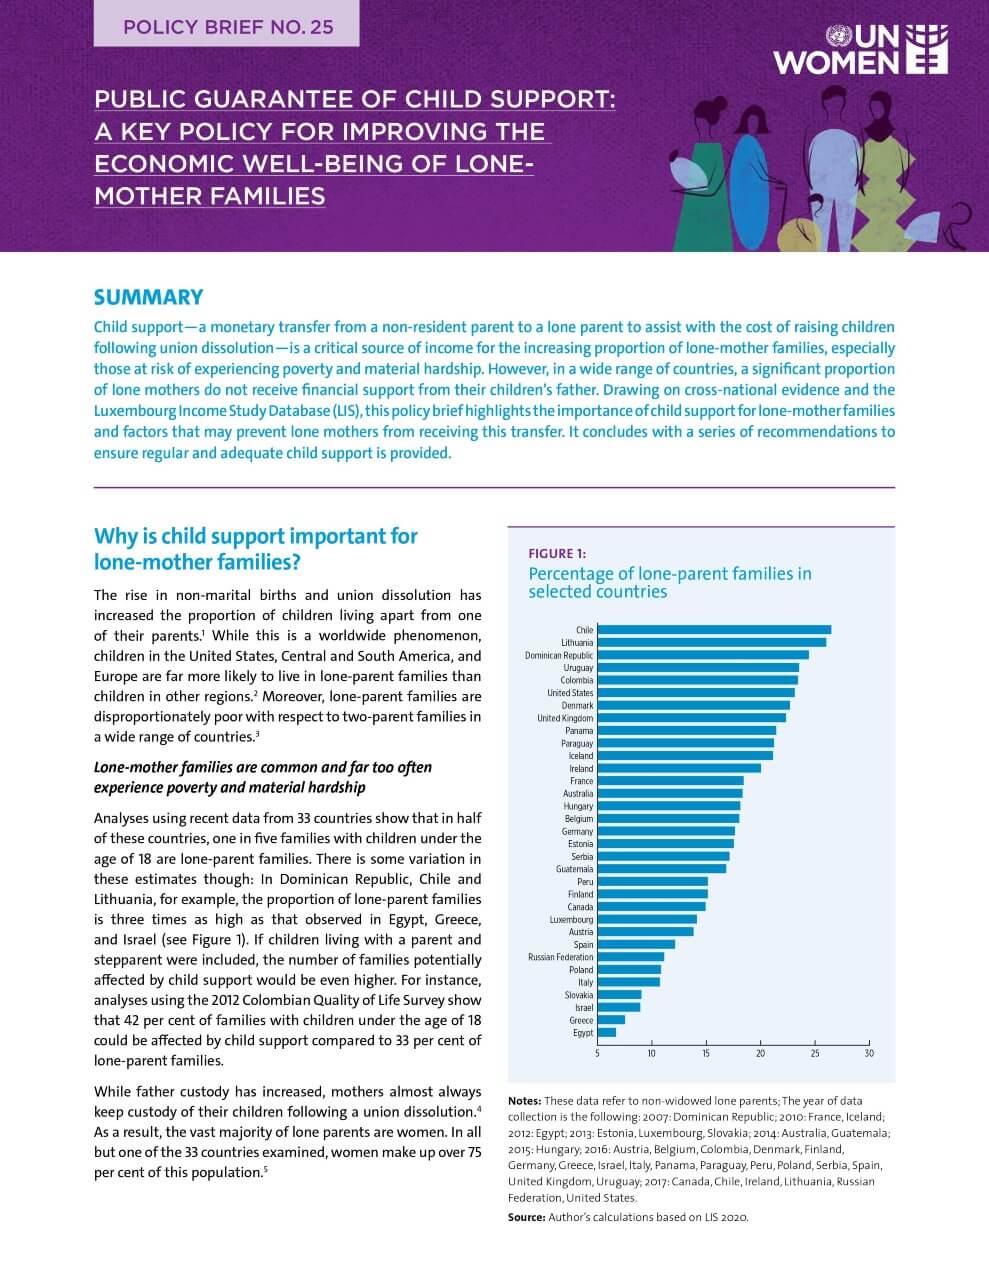 Public guarantee of child support: A key policy for improving the economic well-being of lone-mother families